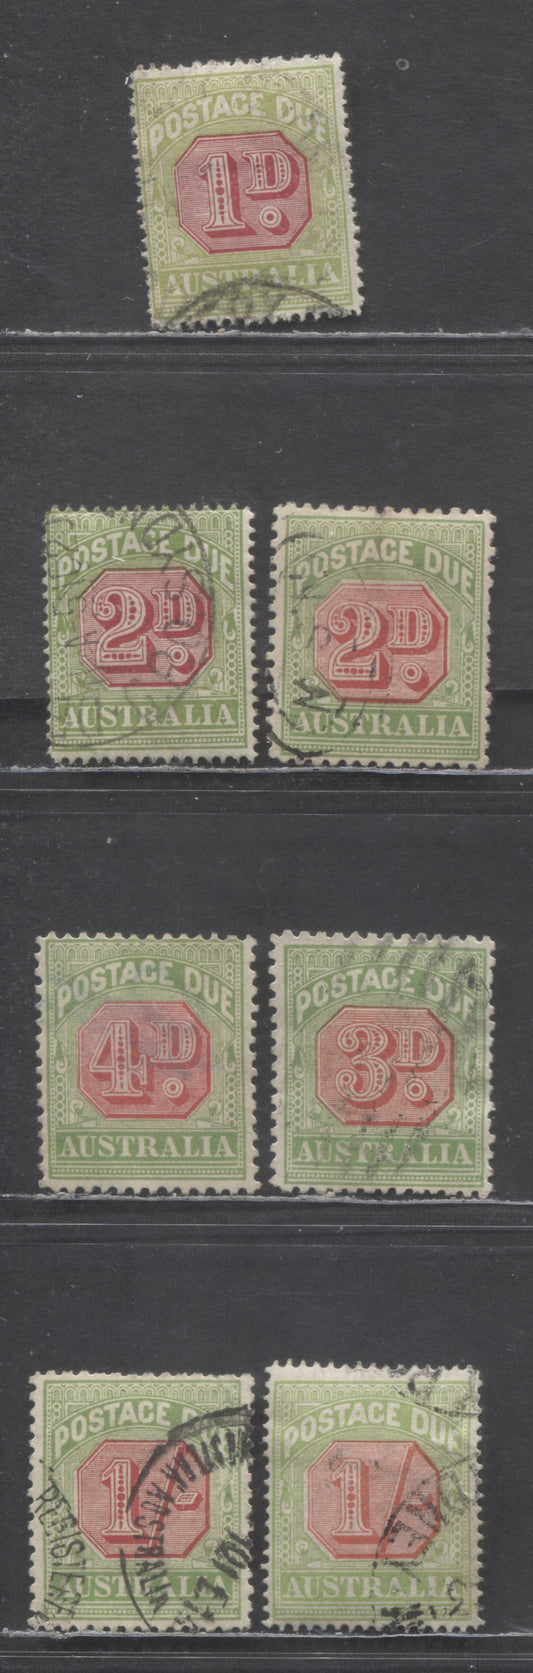 Lot 99 Australia SC#J40c/J45a 1909-1923 Postage Dues, Perf 12x12.5, Crown Over Double Lined A Wmk, 7 Fine Used Singles, Click on Listing to See ALL Pictures, Estimated Value $43